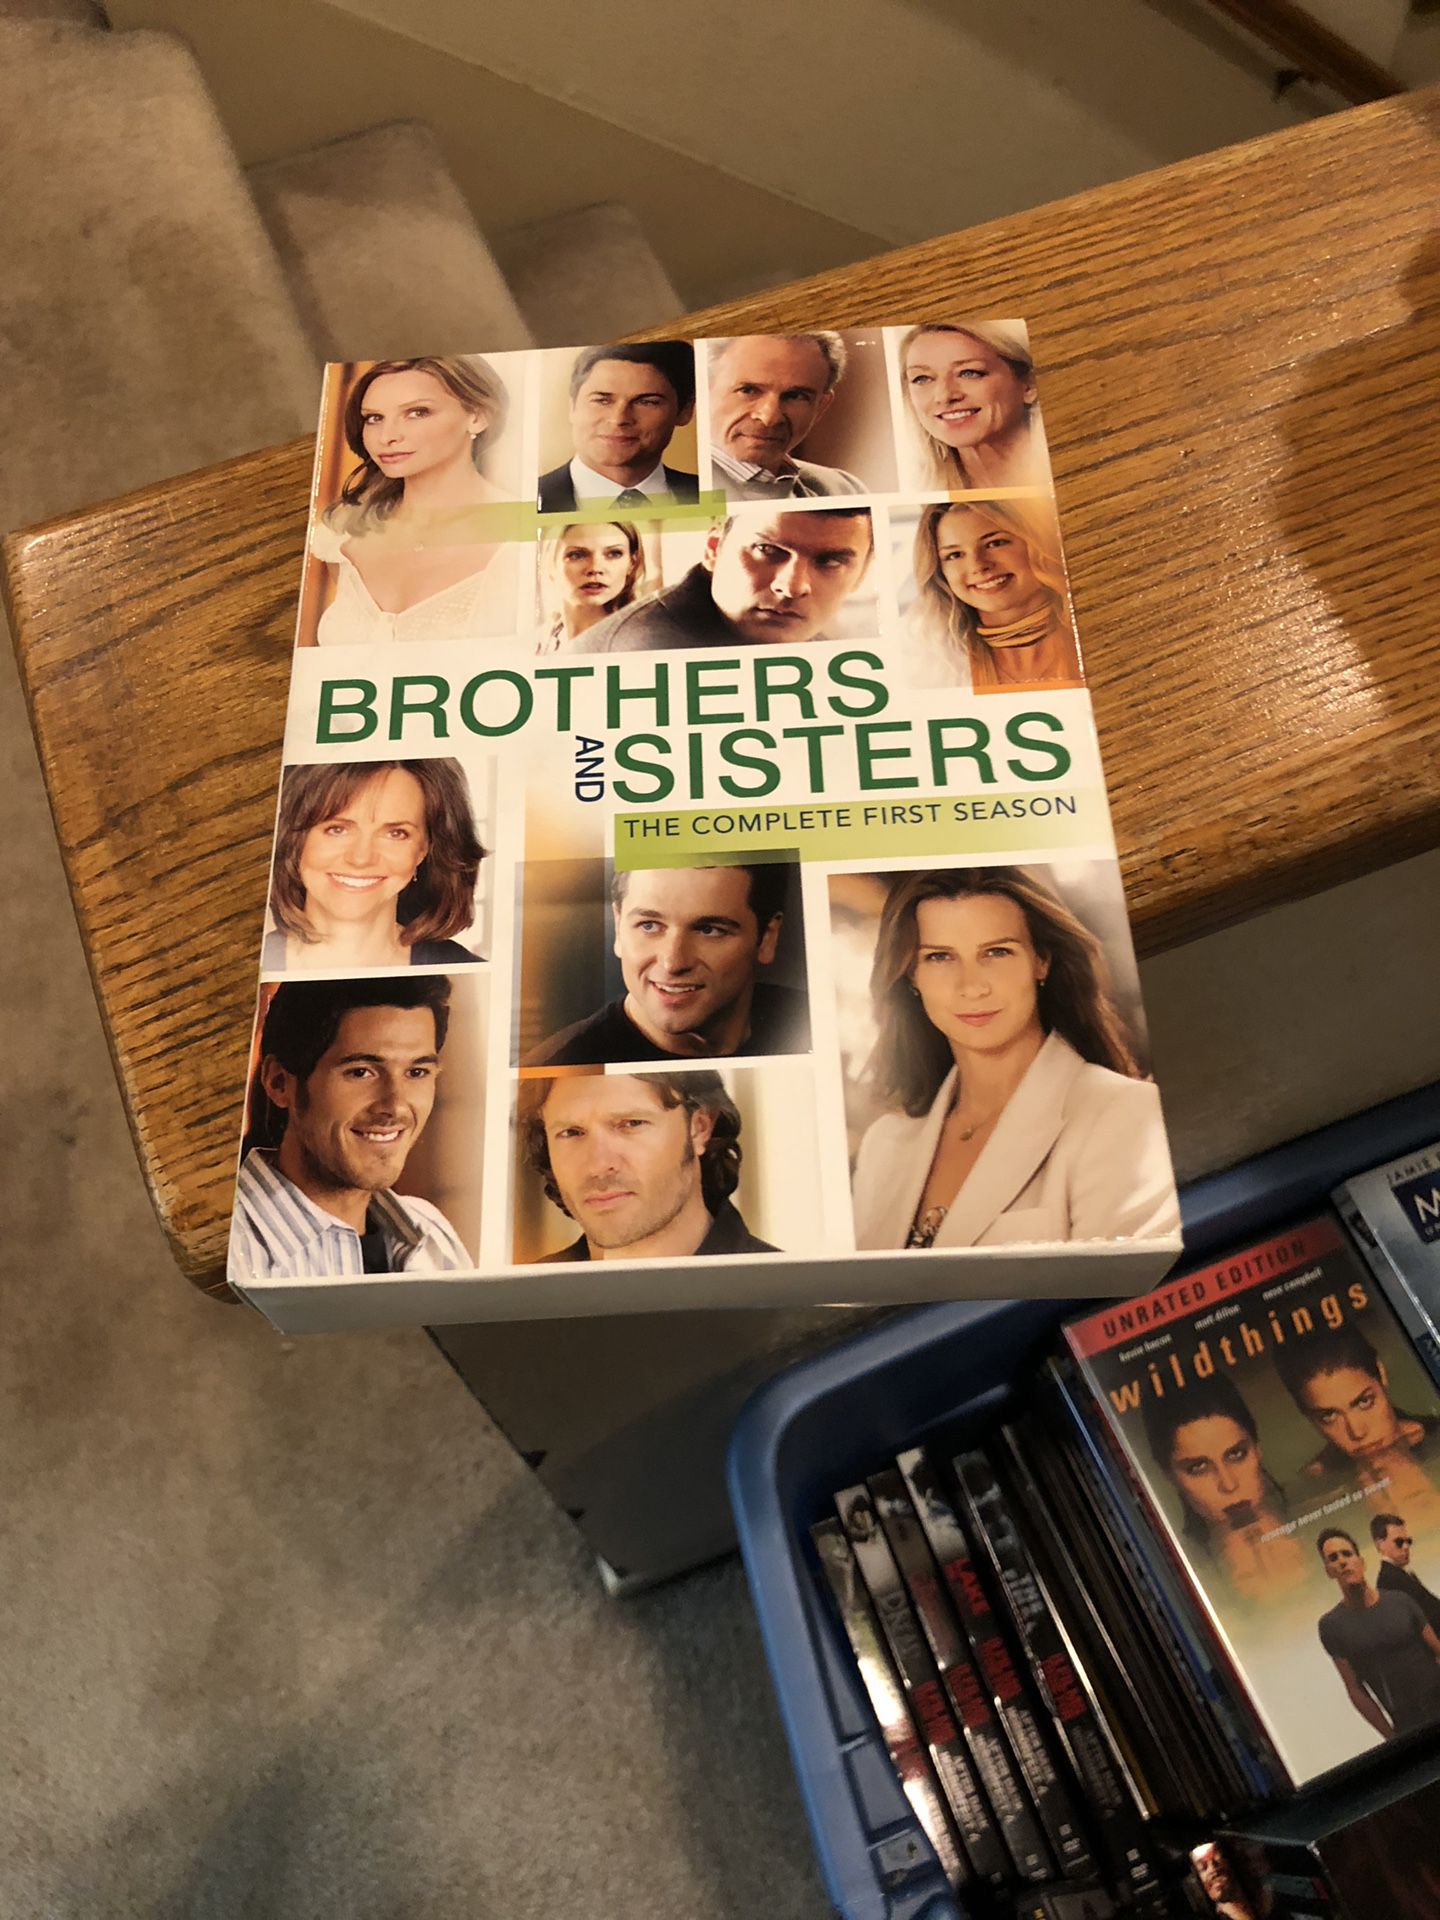 Brothers And Sisters The Complete First Season DVD Box Set one 1 Tv Series S1